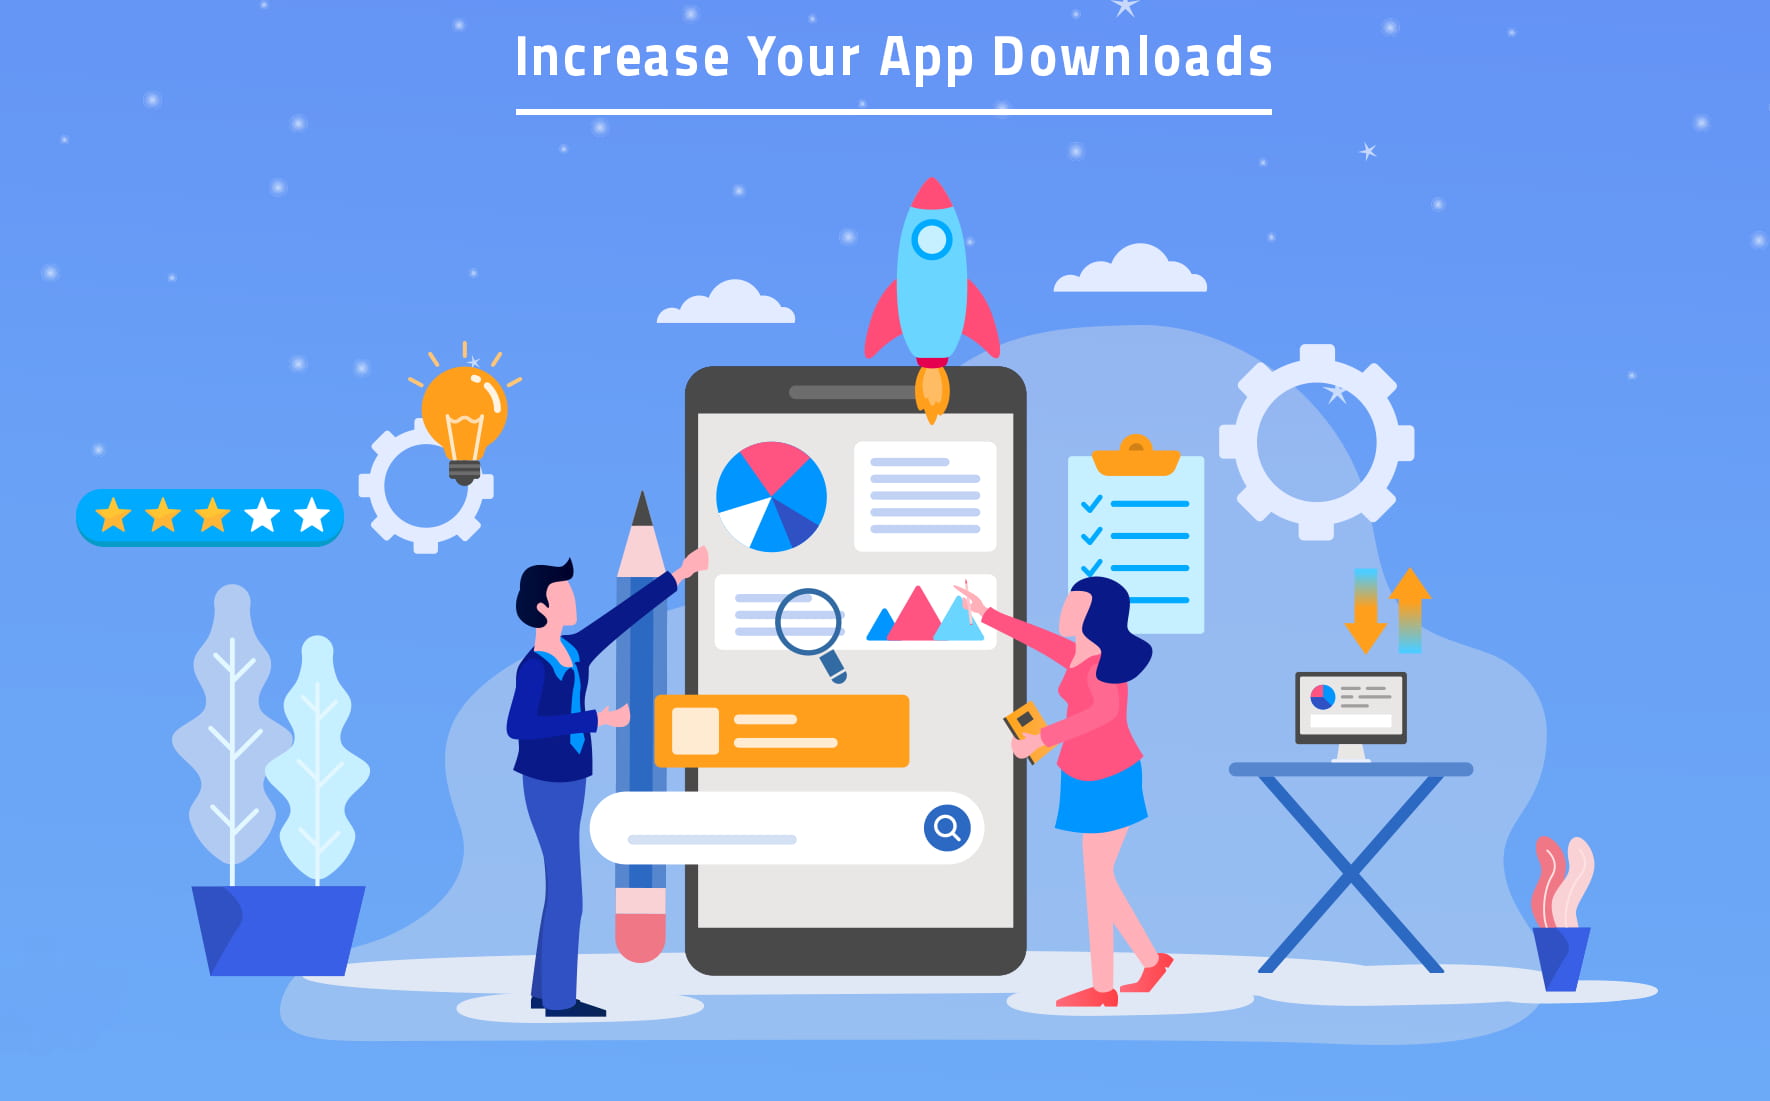 App Store Optimization – An Essential factor for Mobile App Marketing